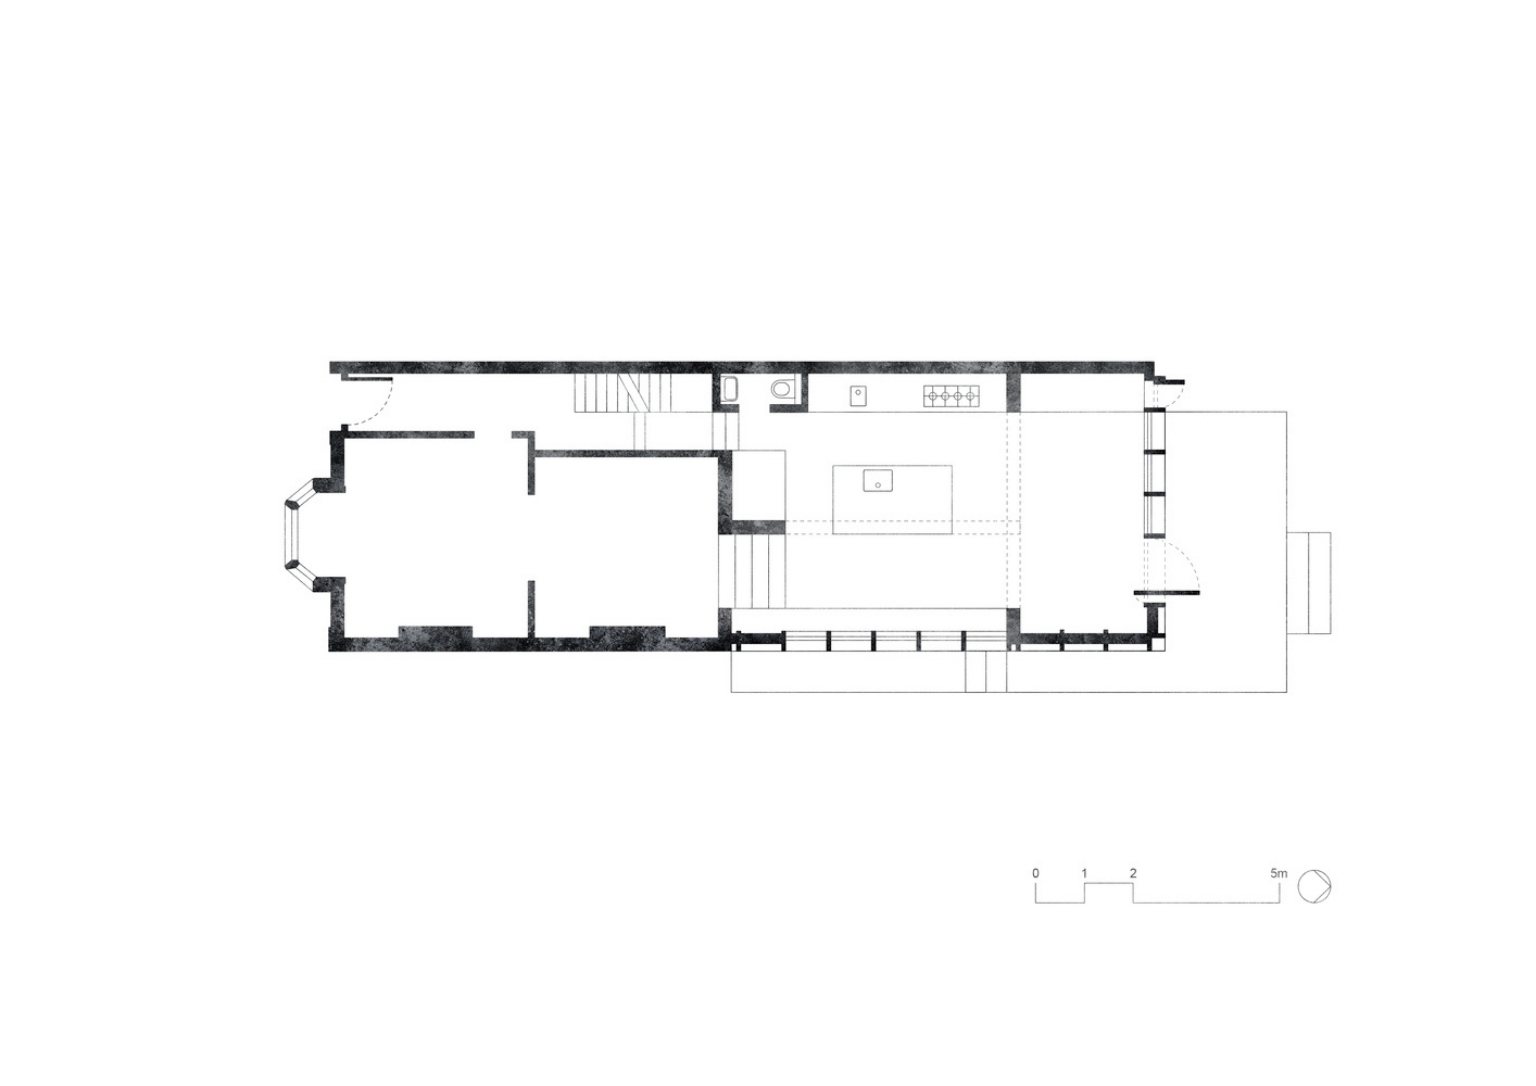 floor plan of living, dining, and kitchen areas